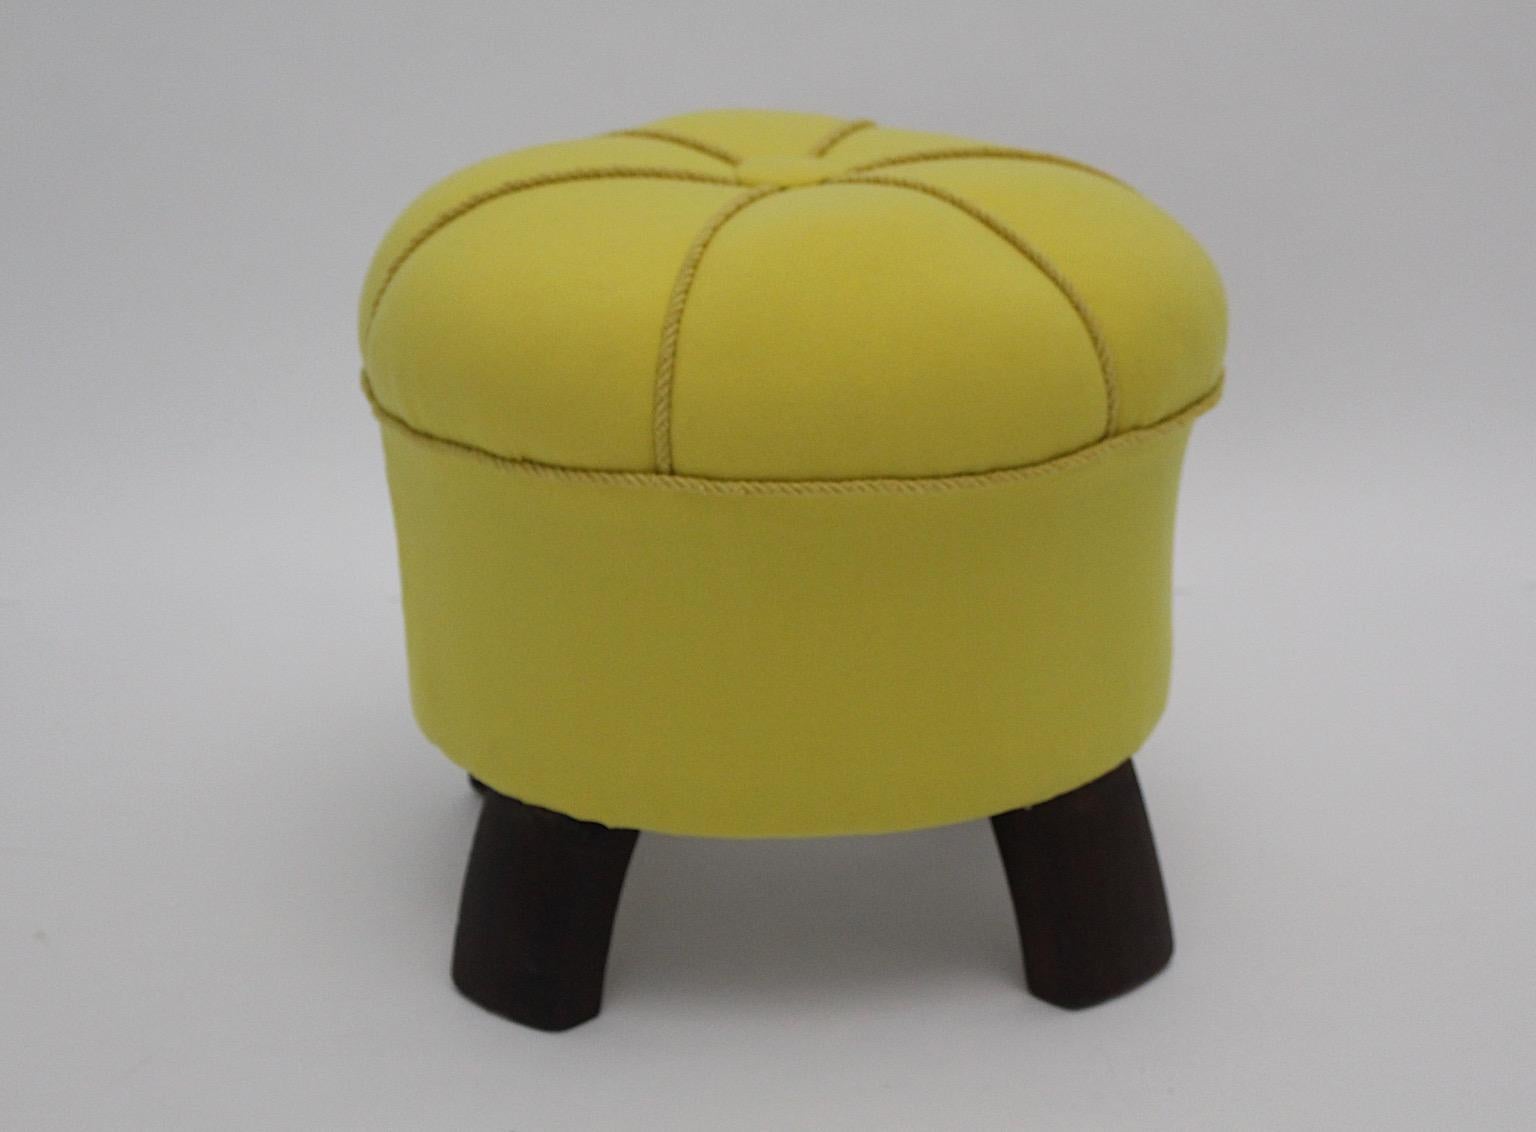 Art Deco vintage pouf or stool or tabouret from beech and upholstery new covered with sunny yellow textile fabric and yellow cords Austria, 1930s.
An amazing Art Deco vintage pouf stool or tabouret from the 1930s with beech feet , while the